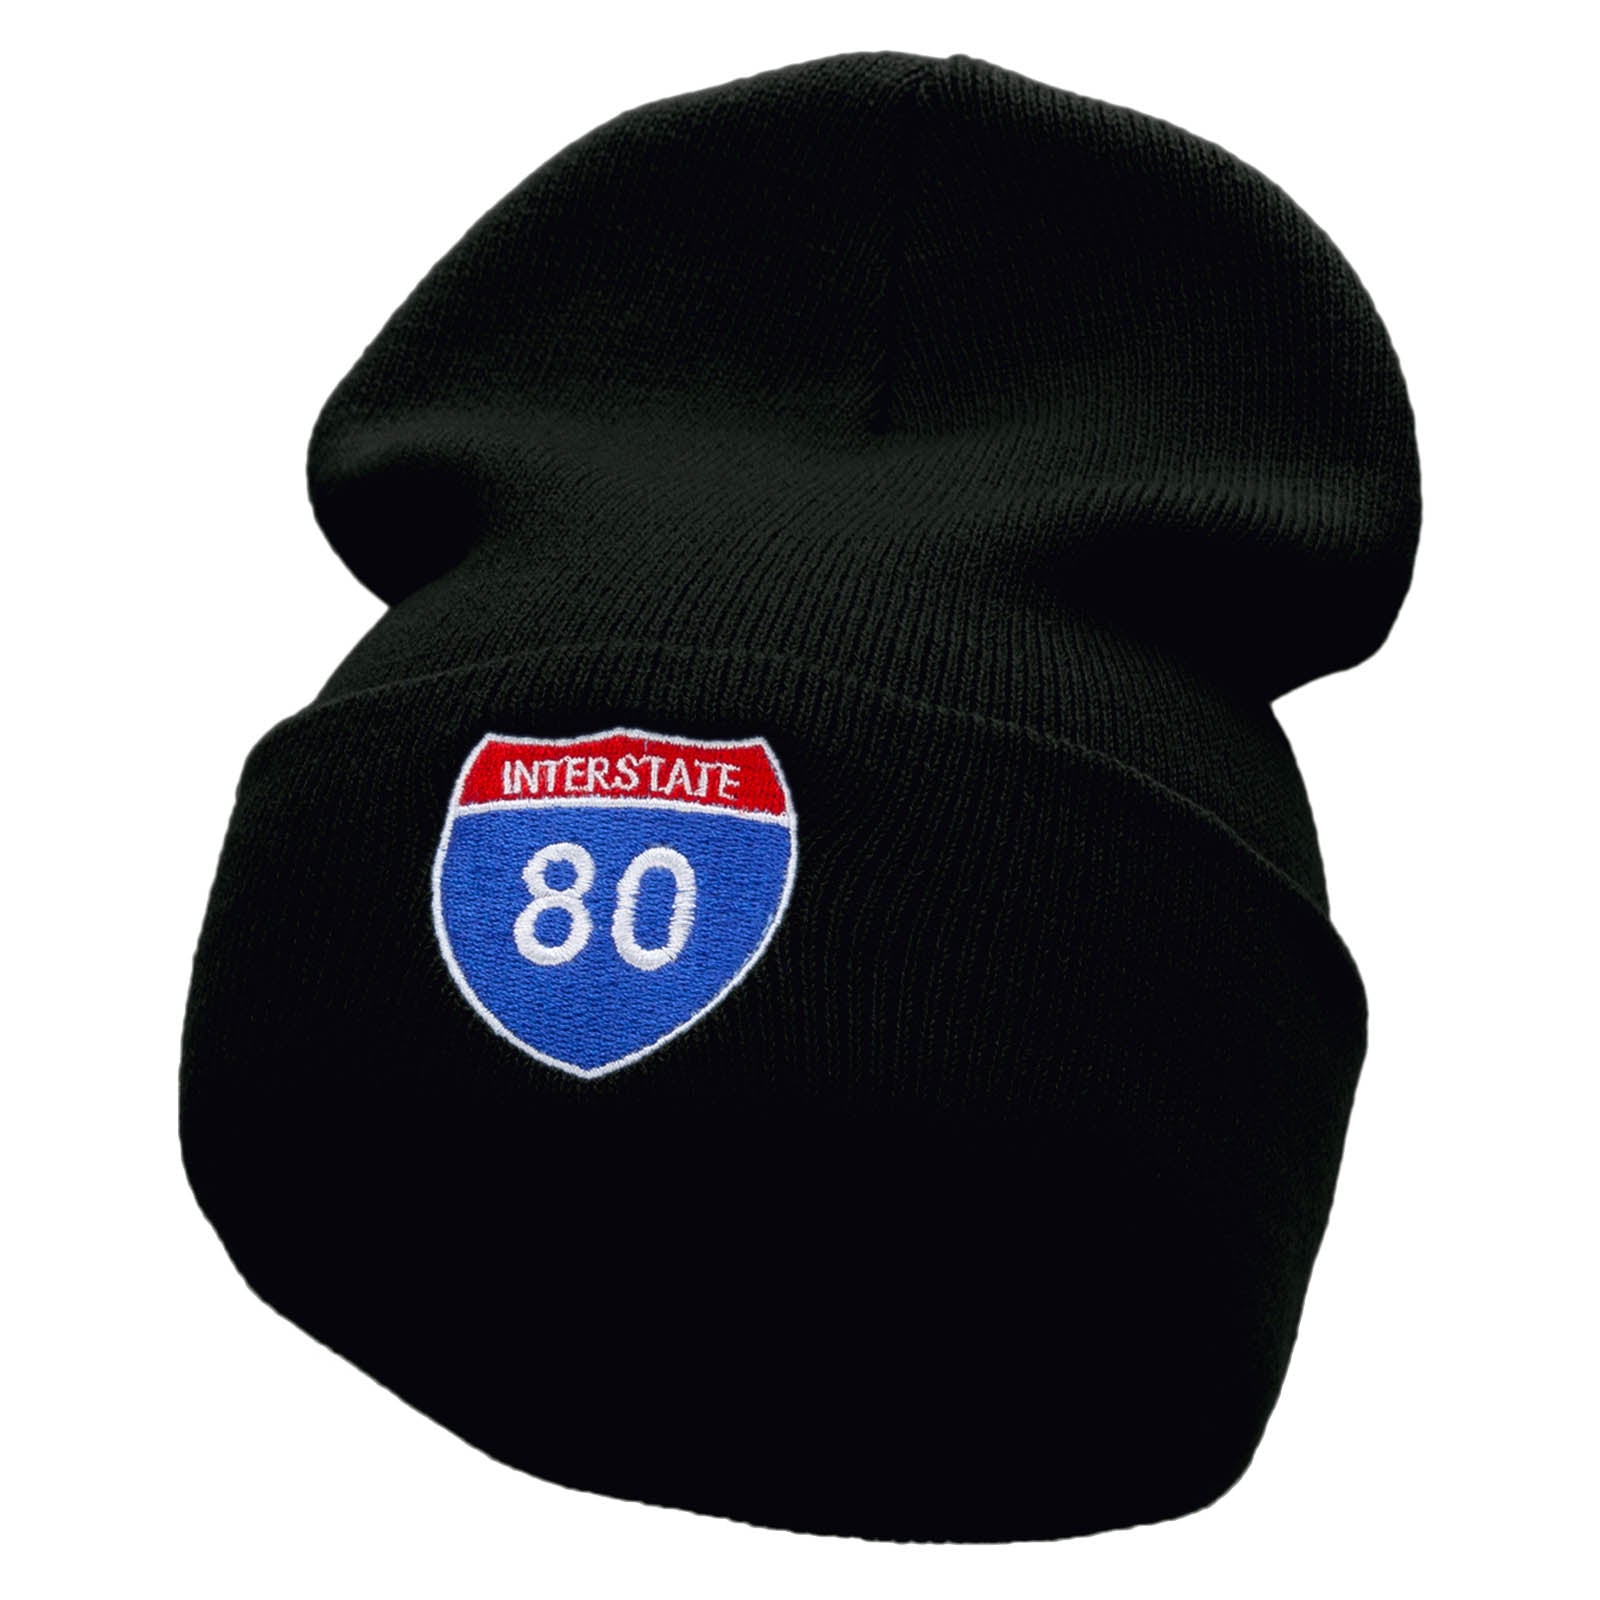 Interstate Highway 80 sign Embroidered 12 Inch Long Knitted Beanie - Black OSFM